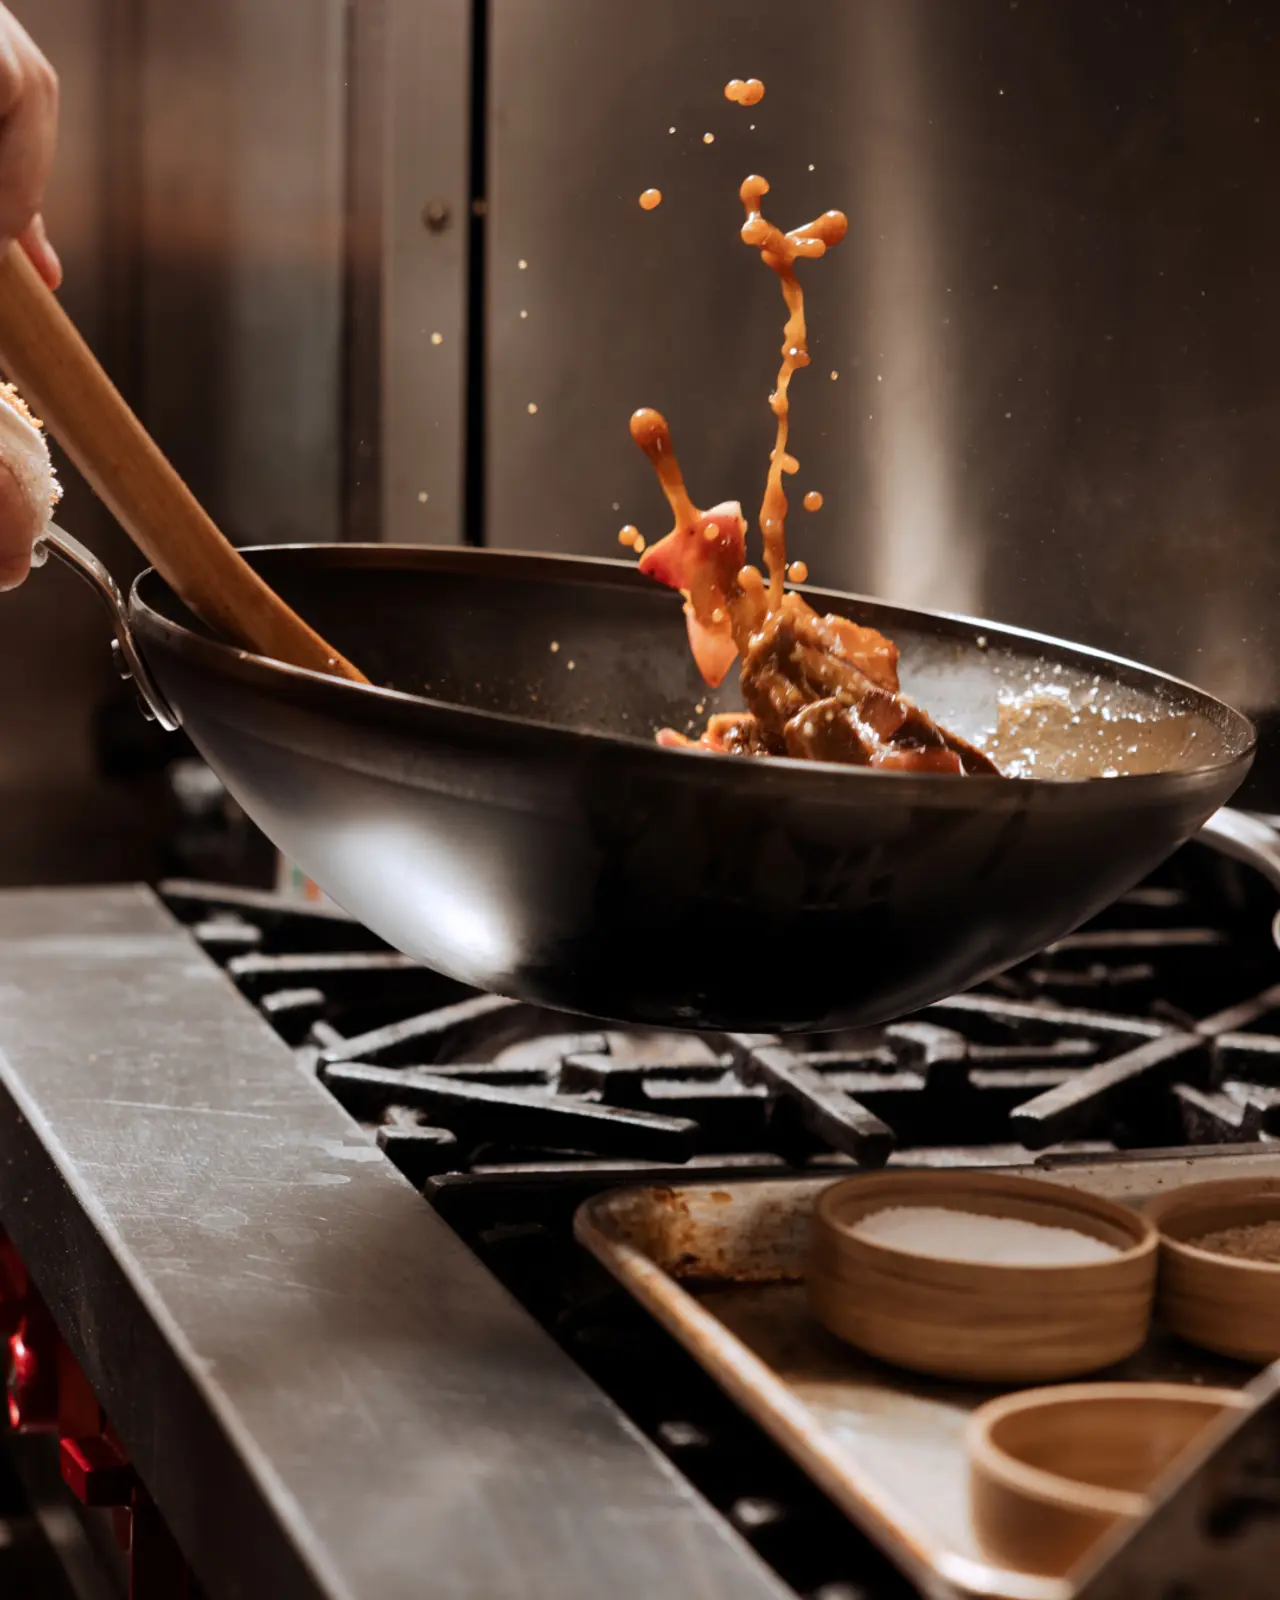 Stir-fried food sizzles as it leaps from a wok above a gas stove, with splashes of sauce captured in mid-air.